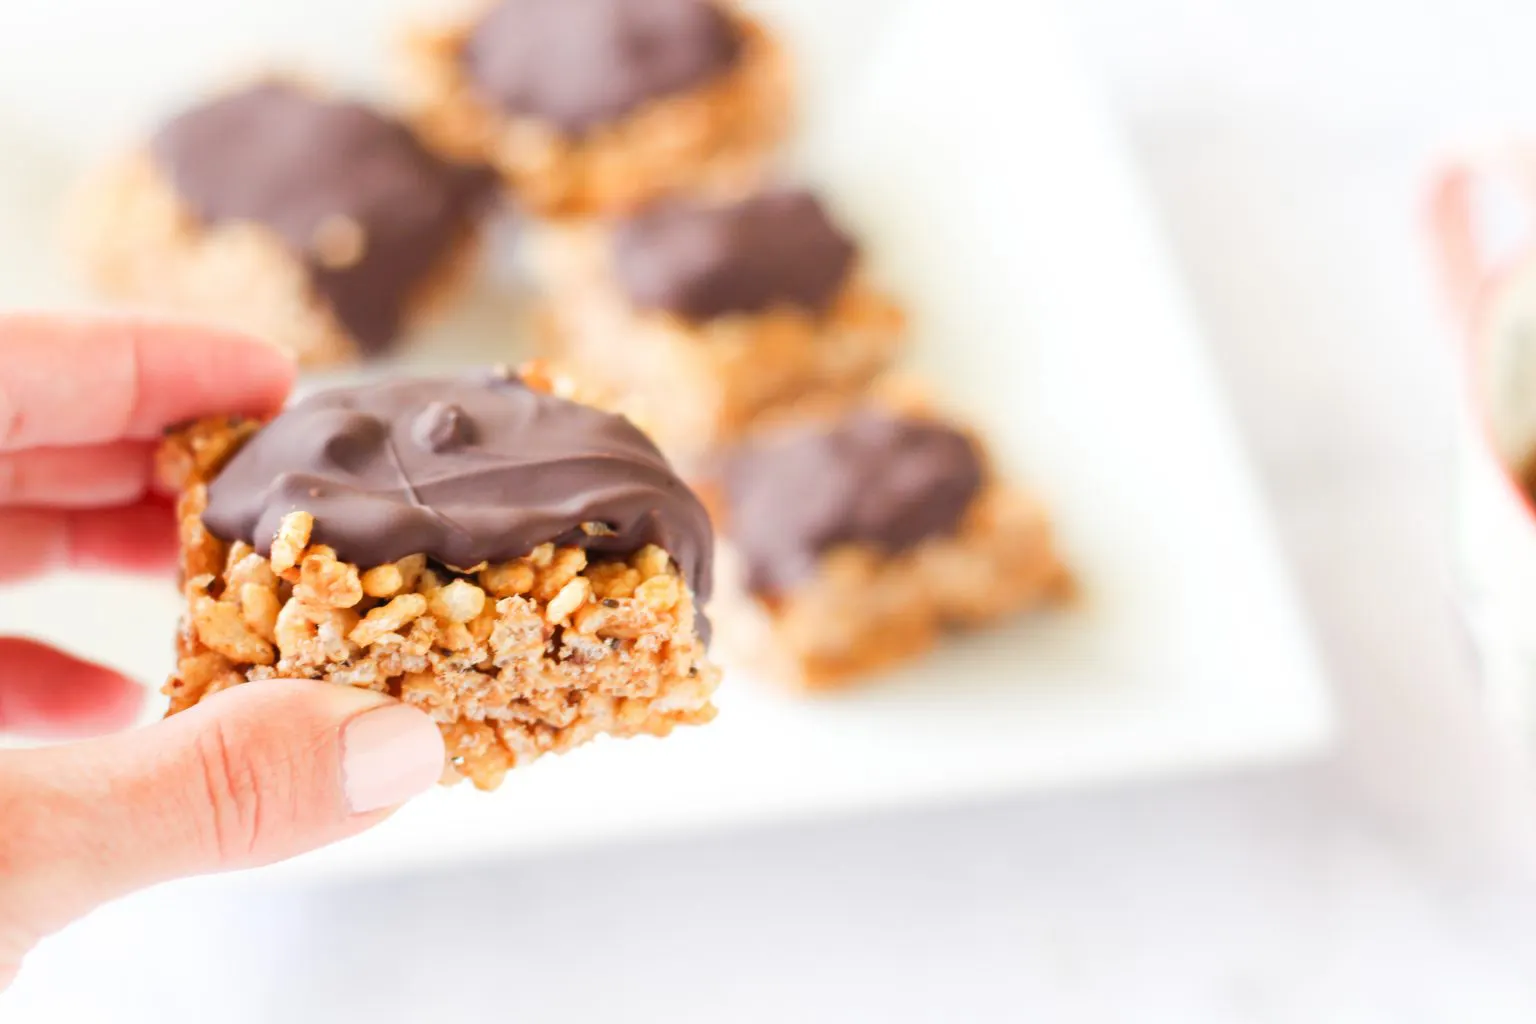 Crunchy chocolate bars with almond butter 